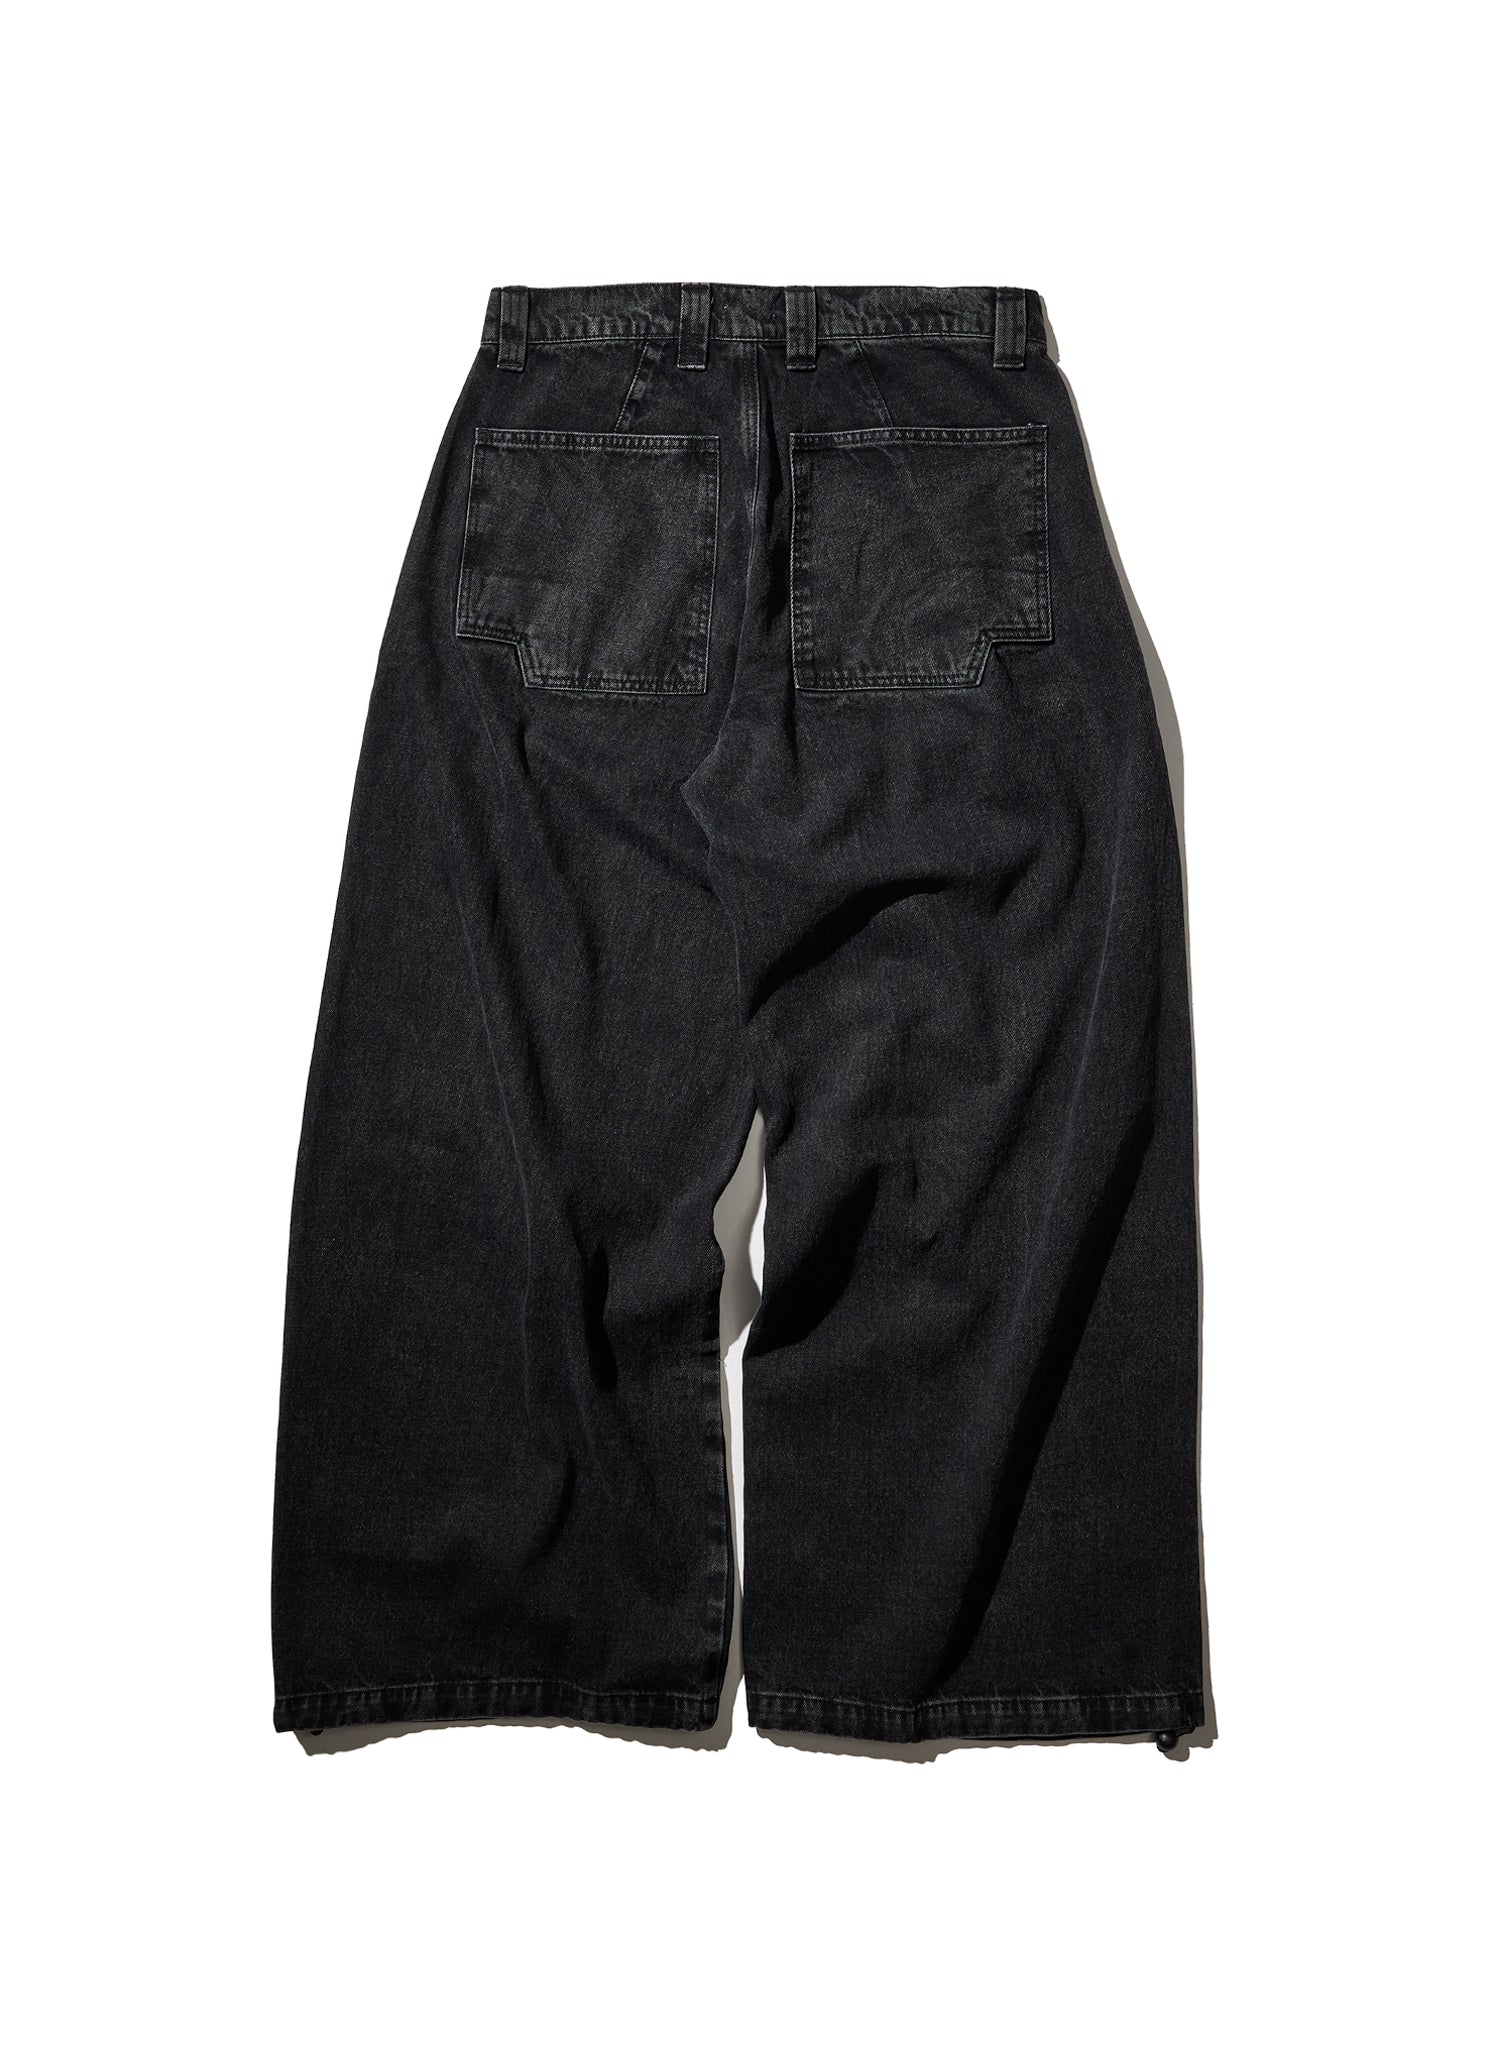 WILLY CHAVARRIA / RAVER PANT WASHED BLACK